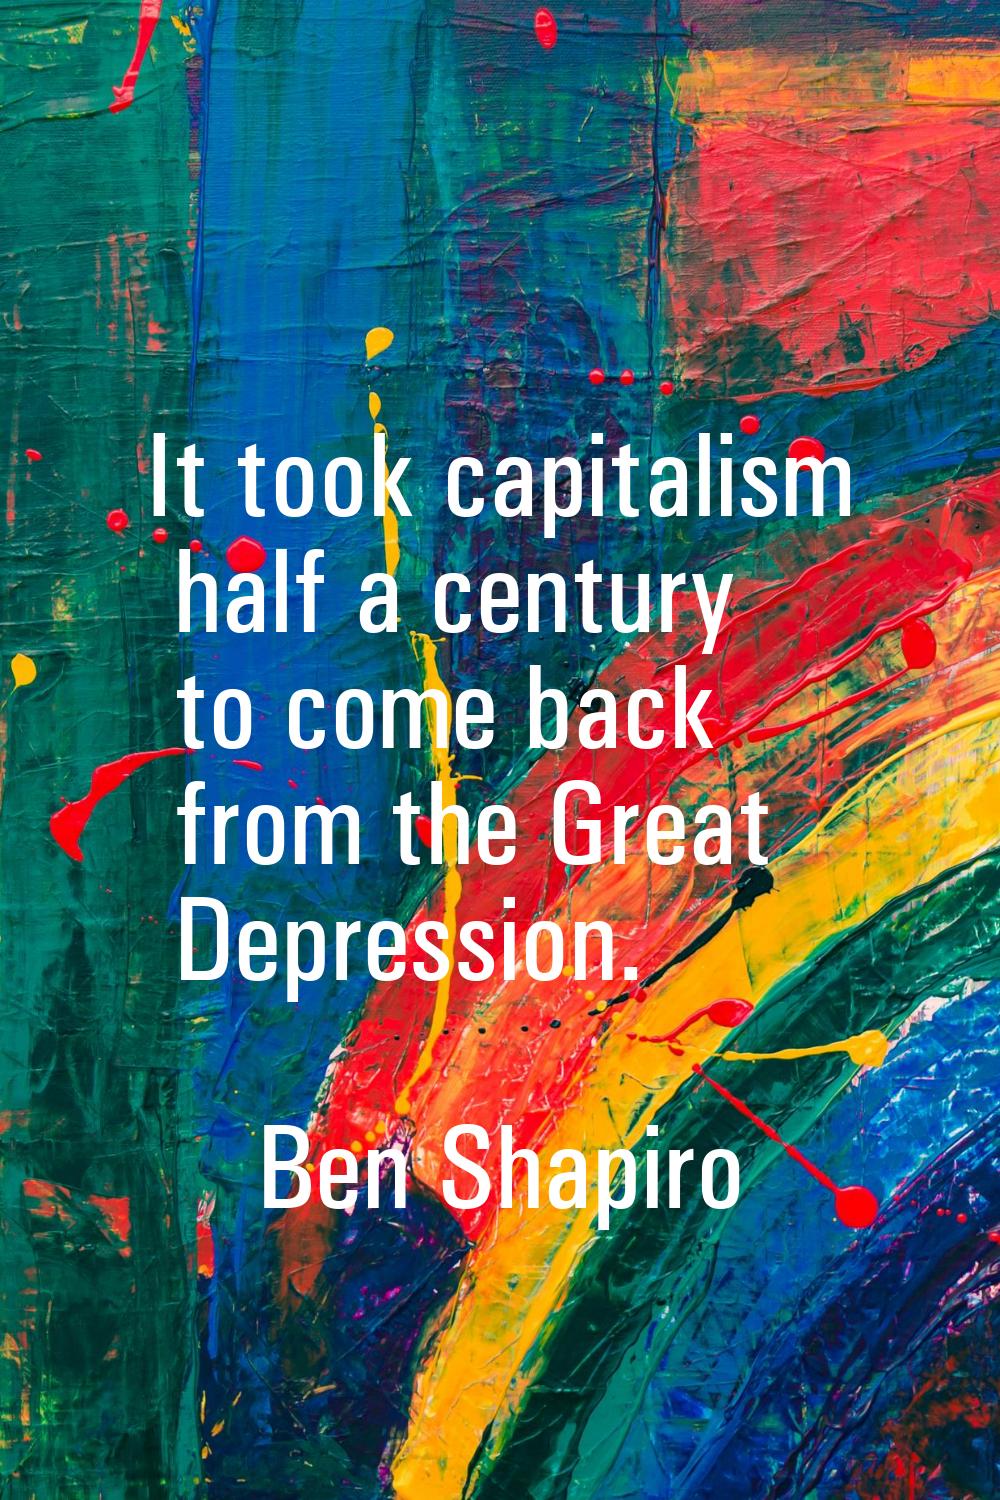 It took capitalism half a century to come back from the Great Depression.